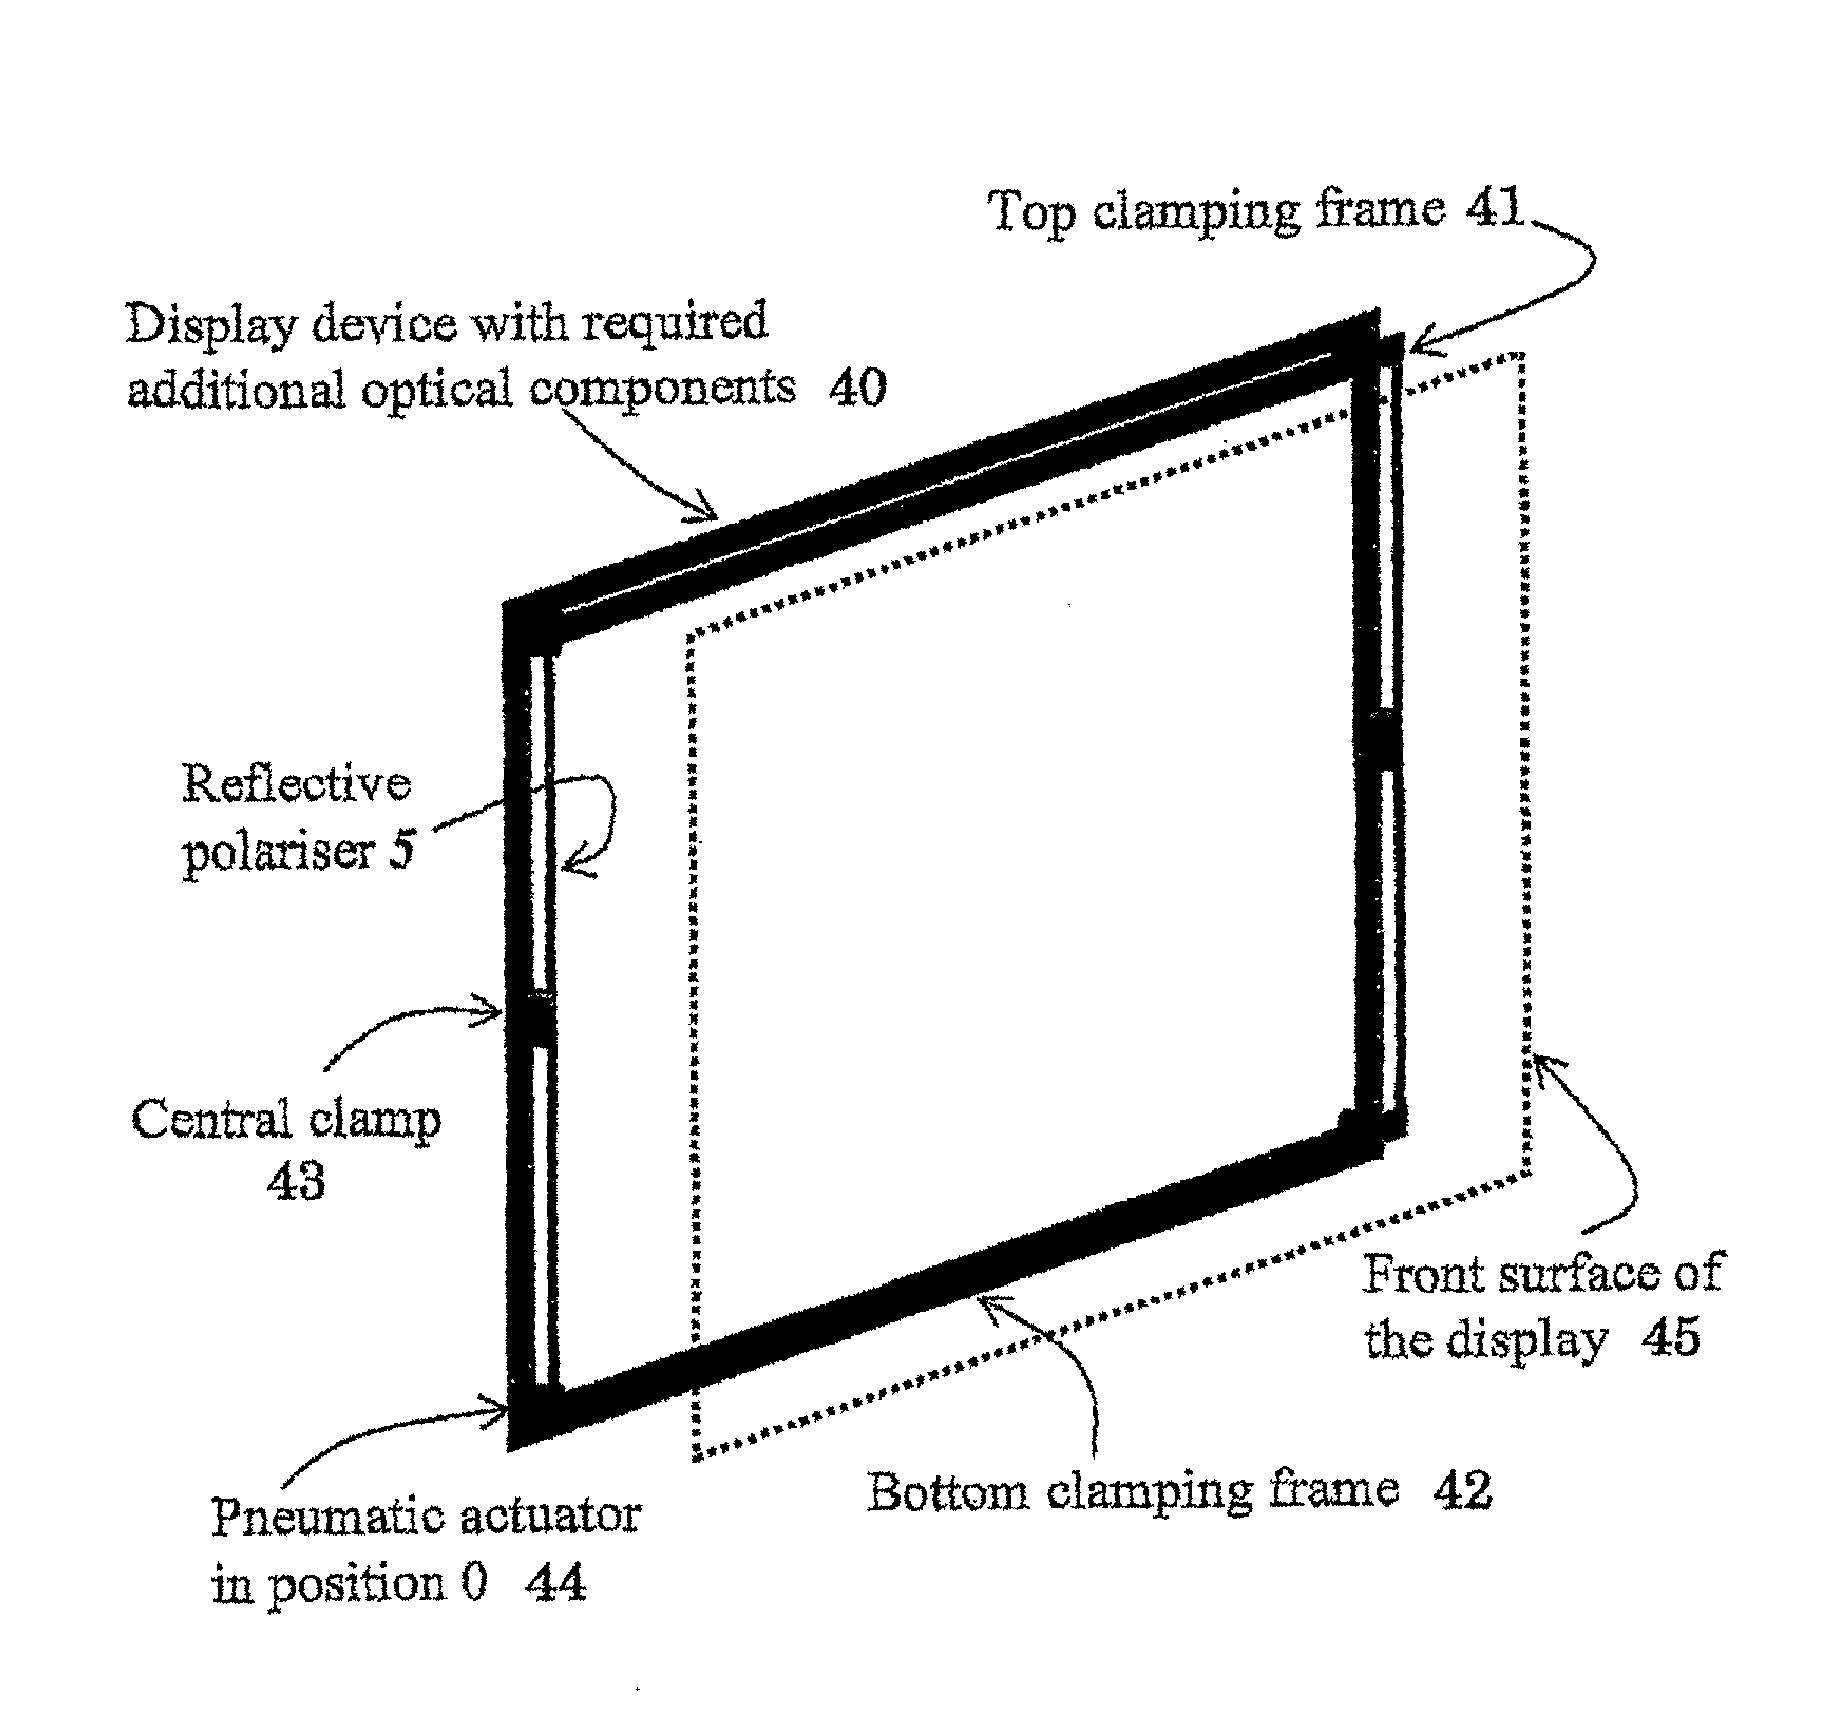 Optical system and display